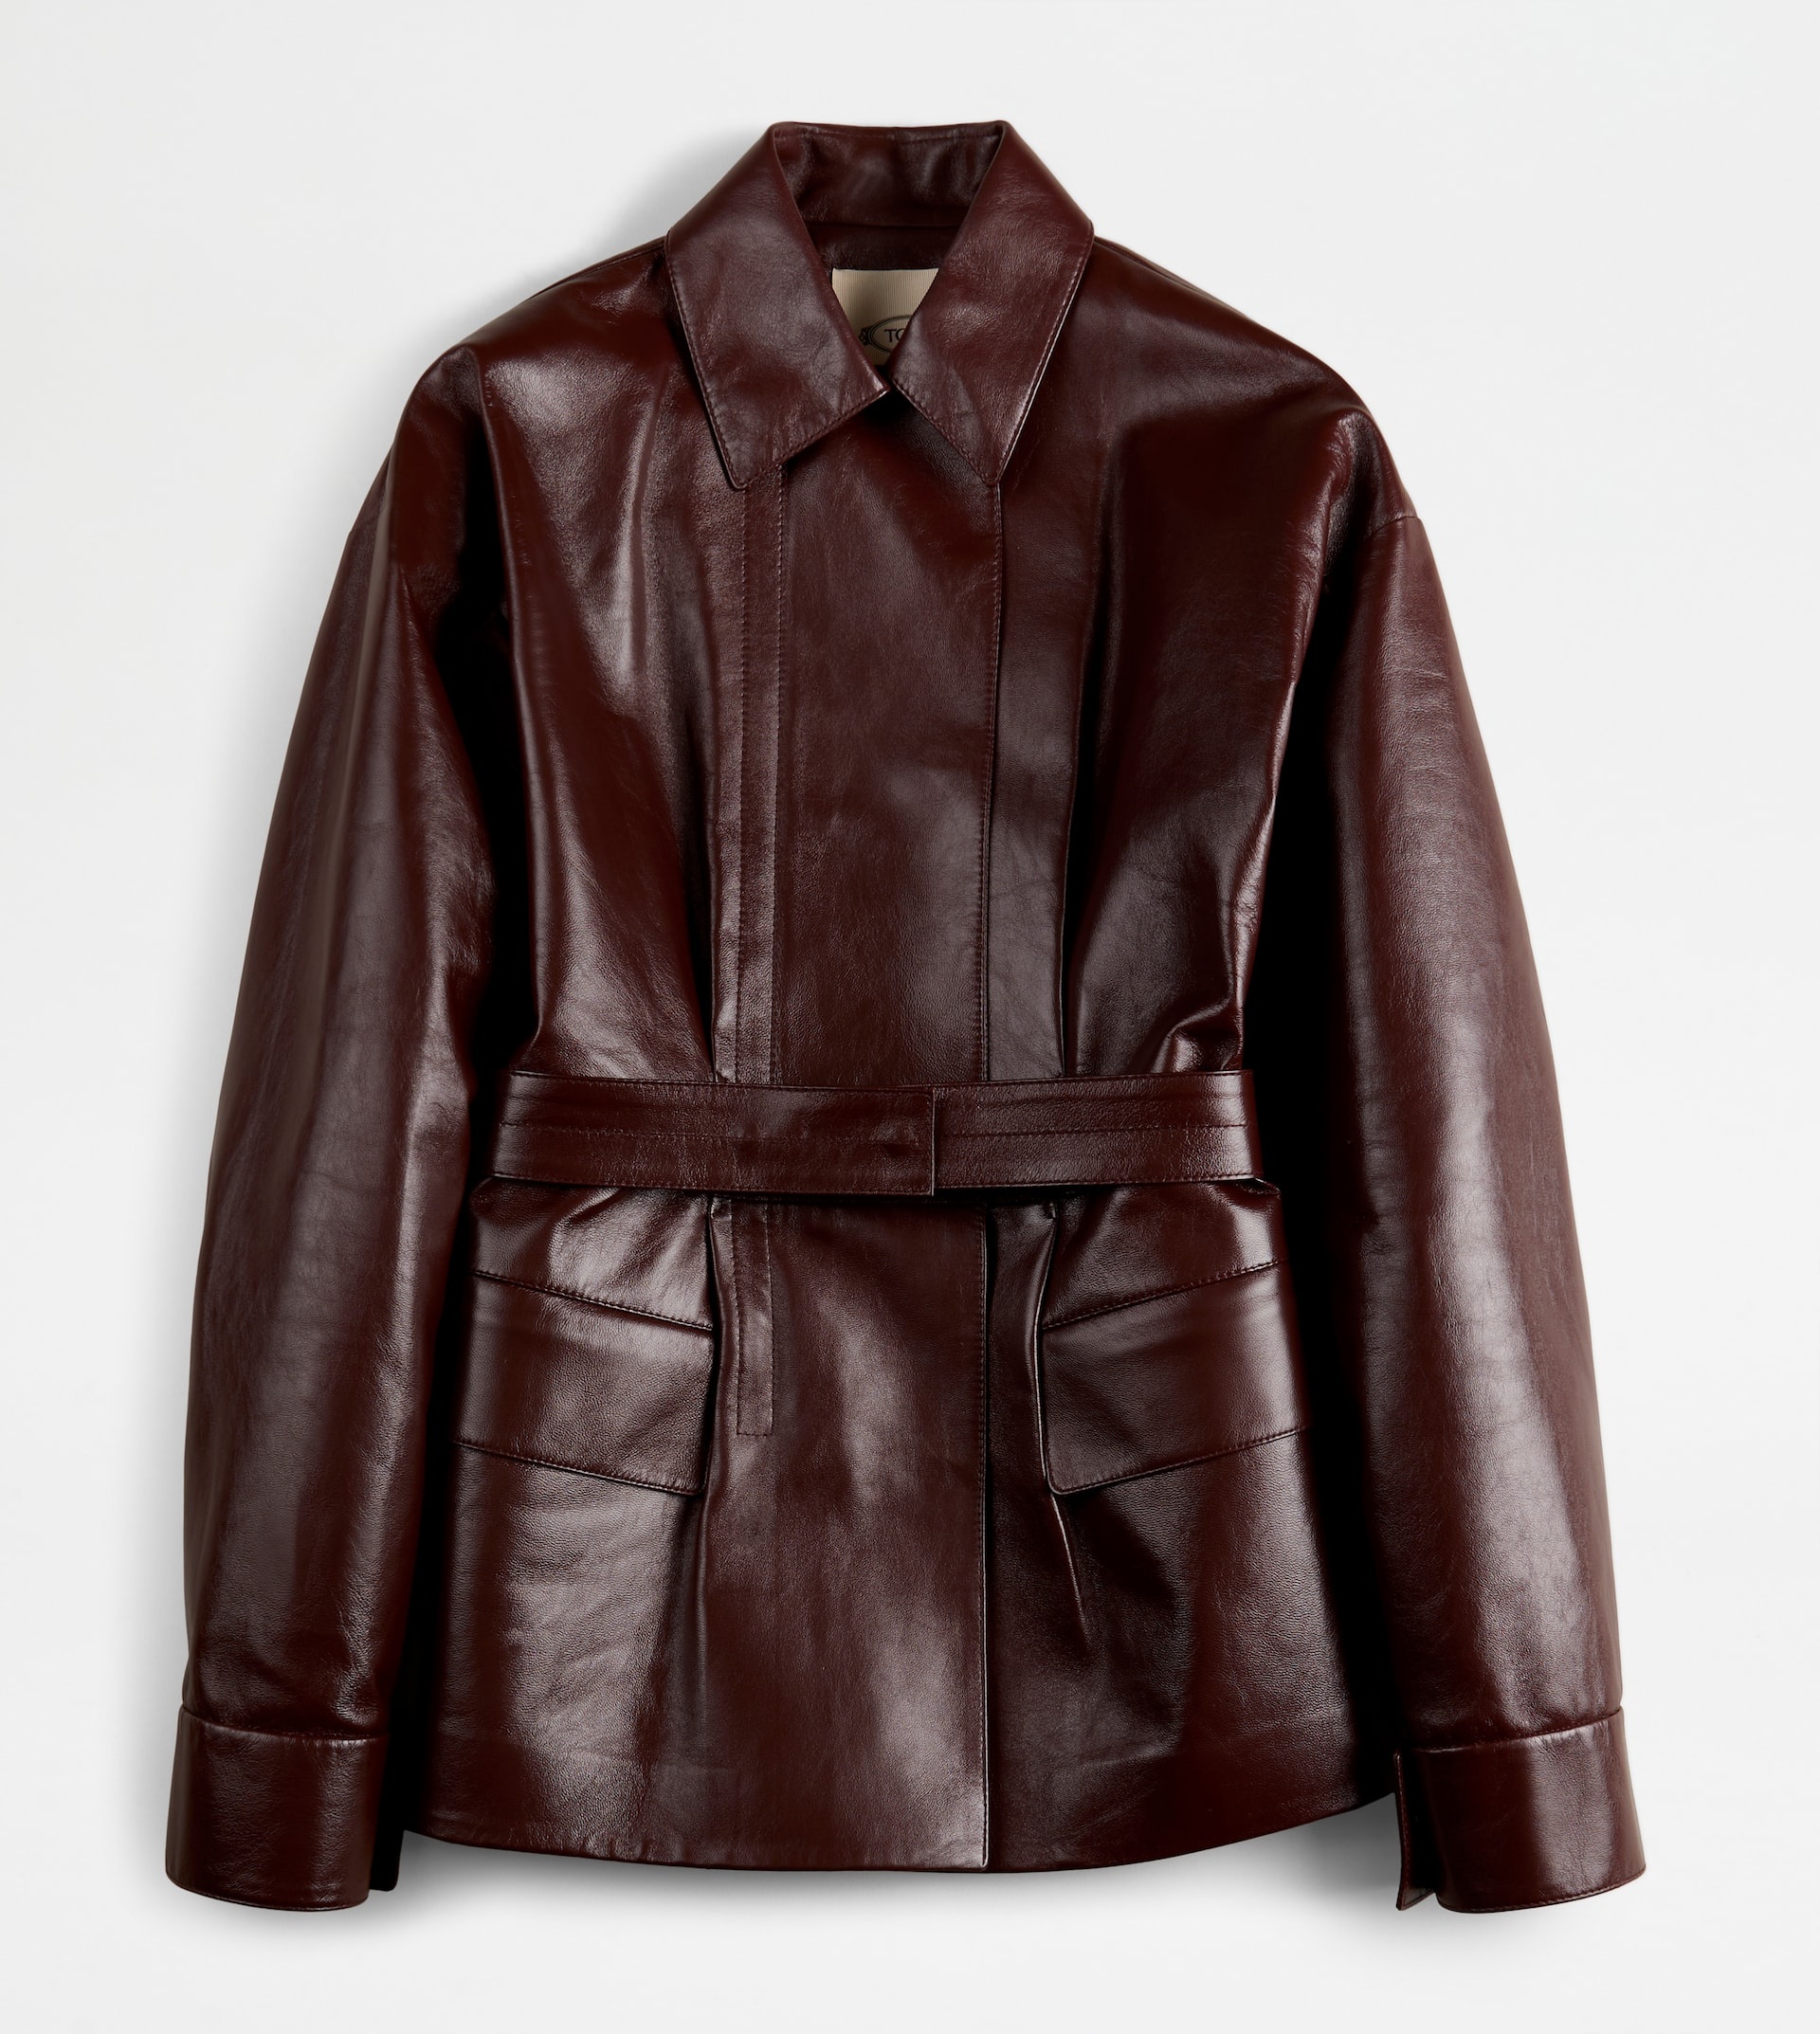 JACKET IN LEATHER - BROWN - 1